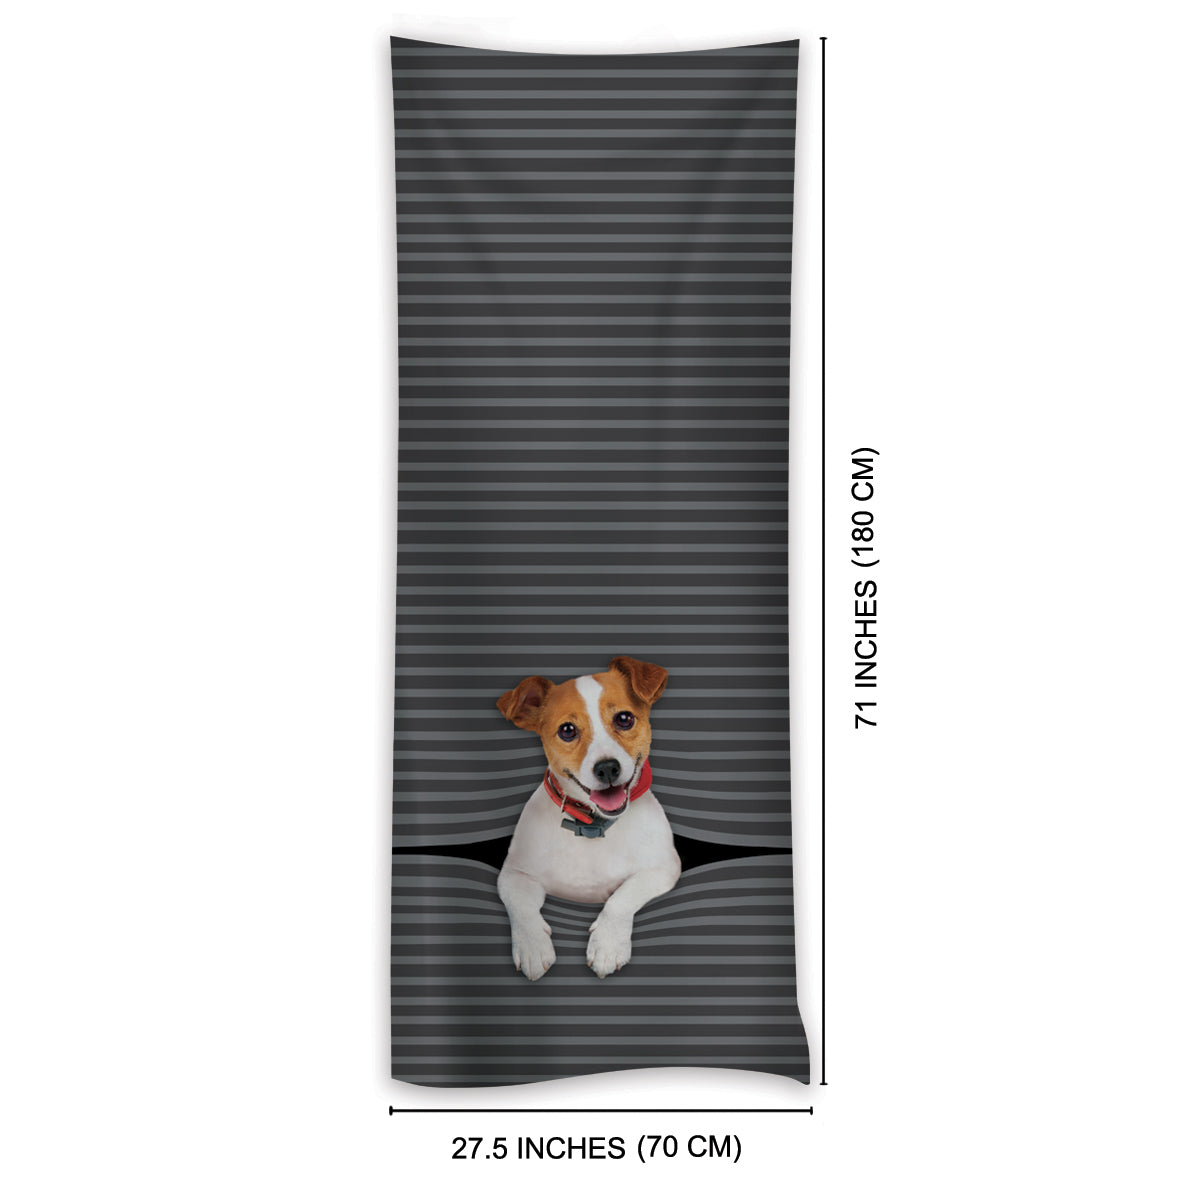 Keep You Warm - Jack Russell Terrier - Scarf V1